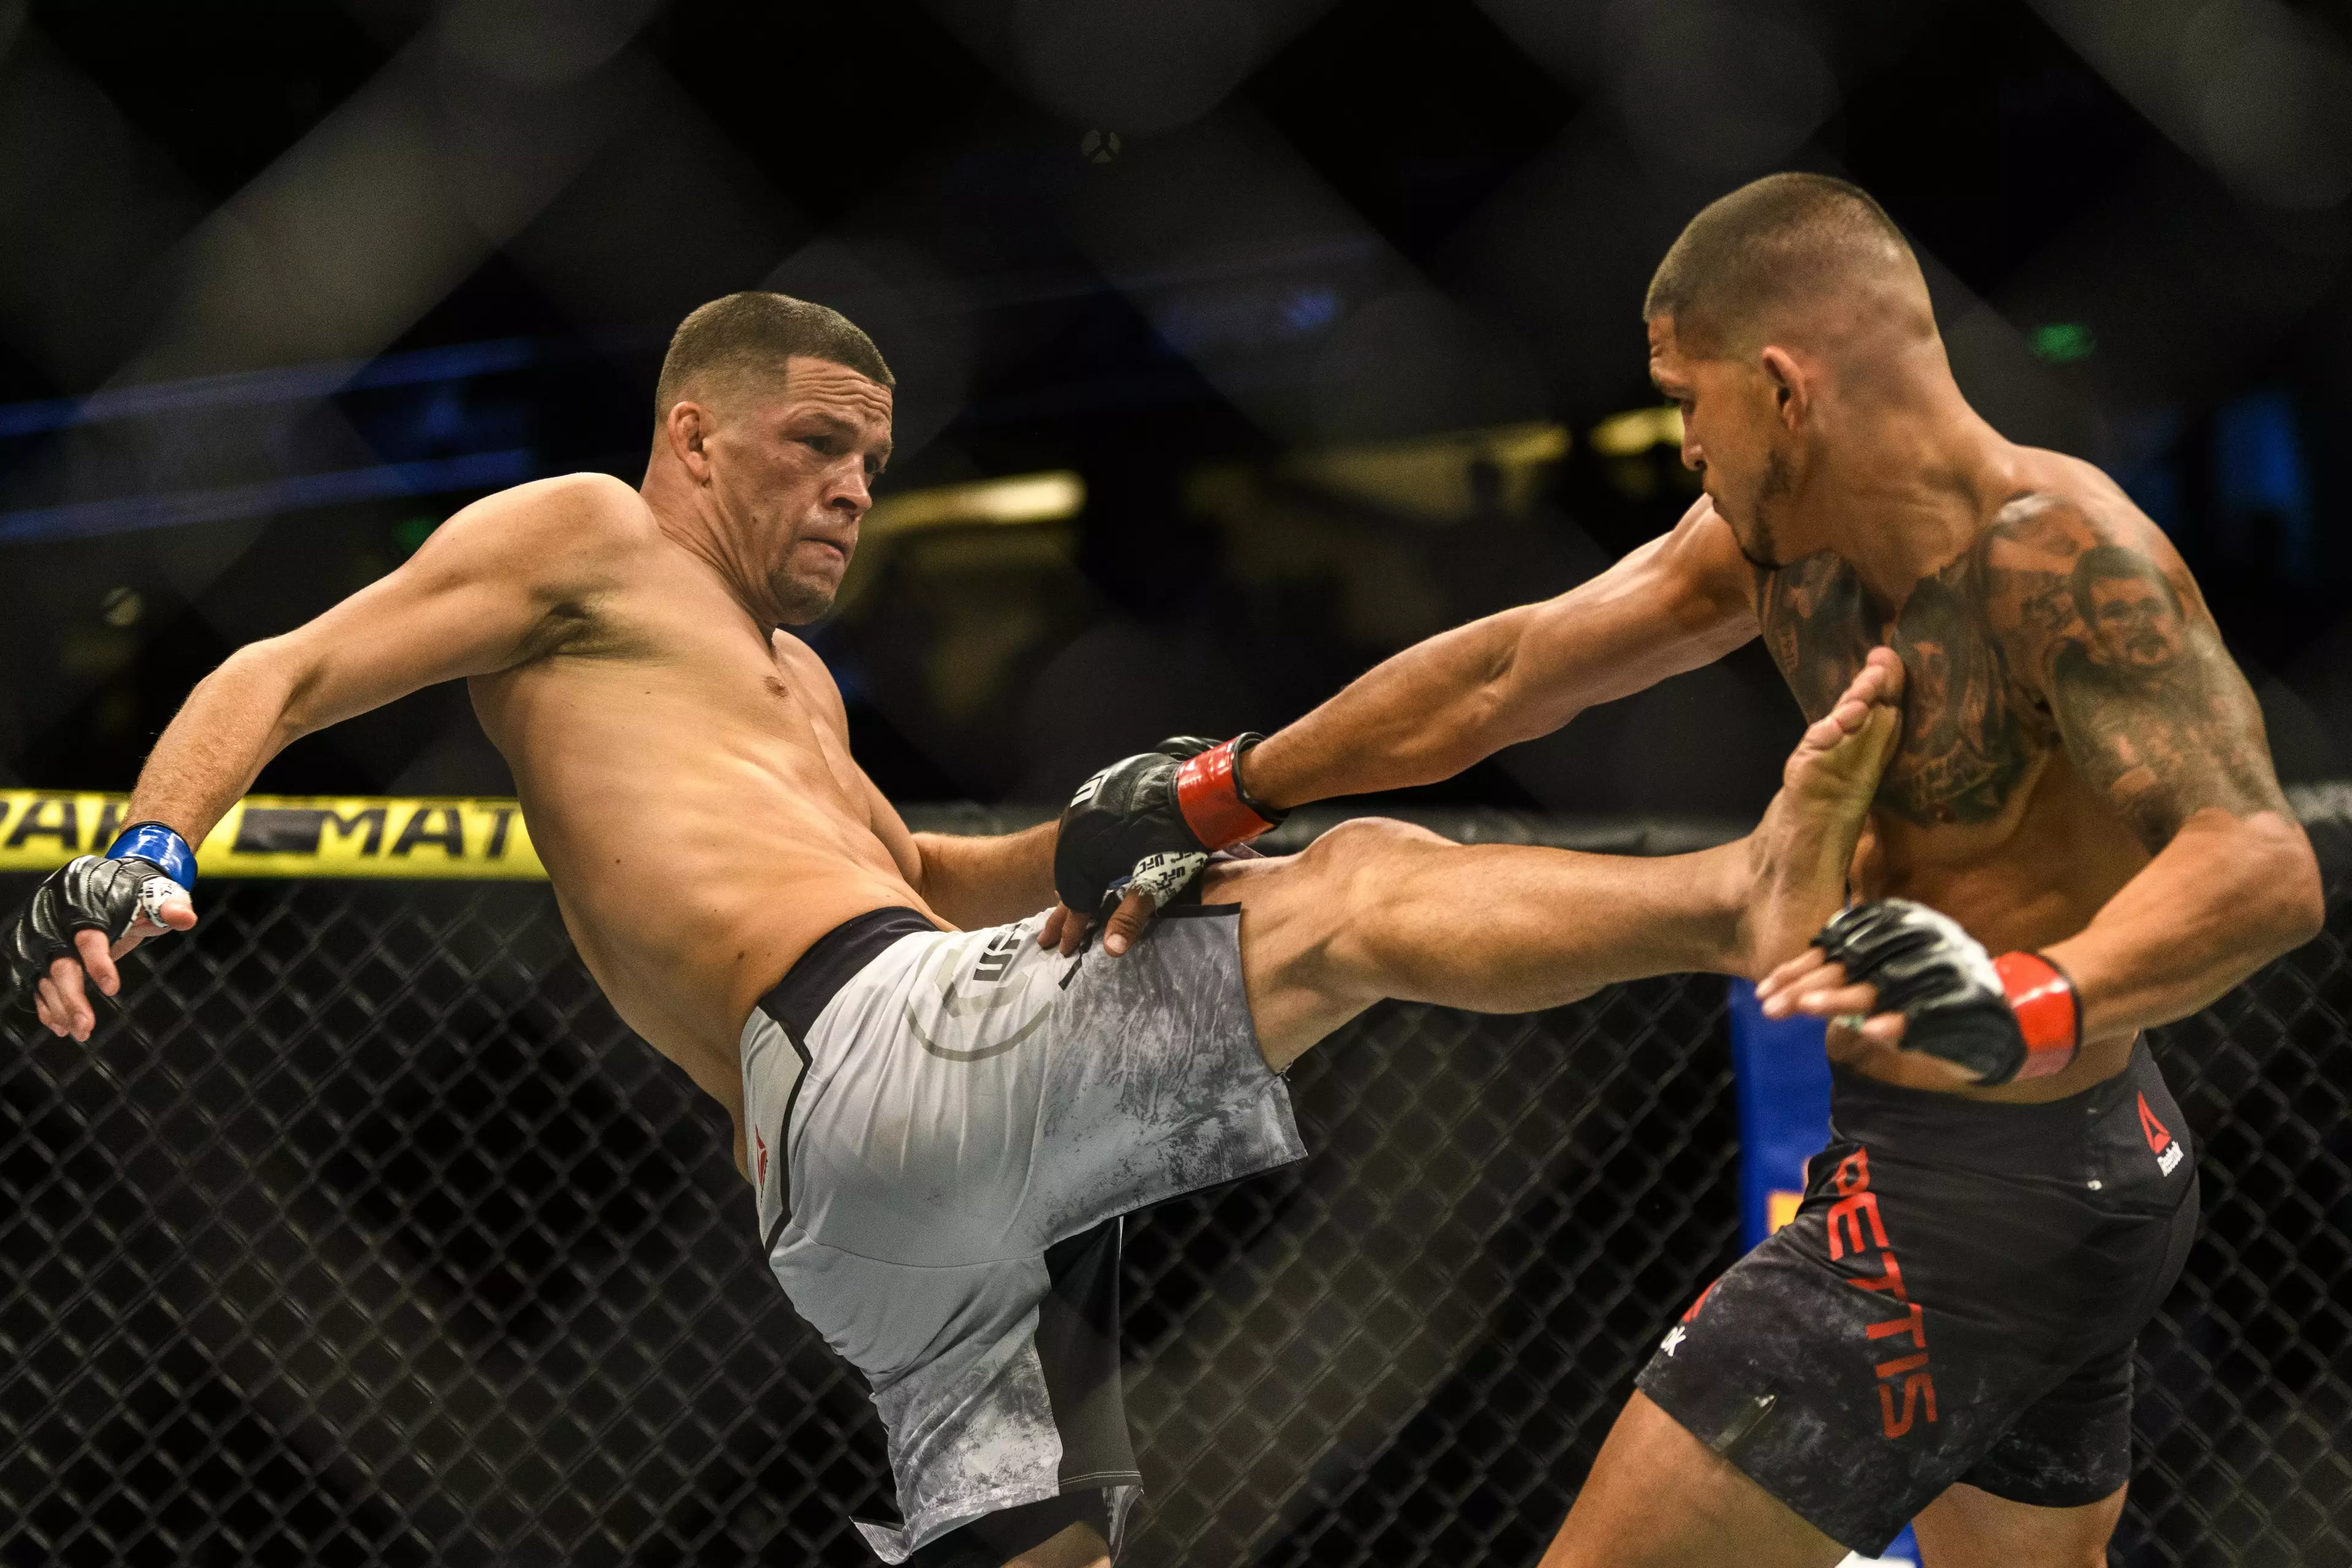 Nate Diaz made his comeback after three years and beat Anthony Pettis in Anaheim